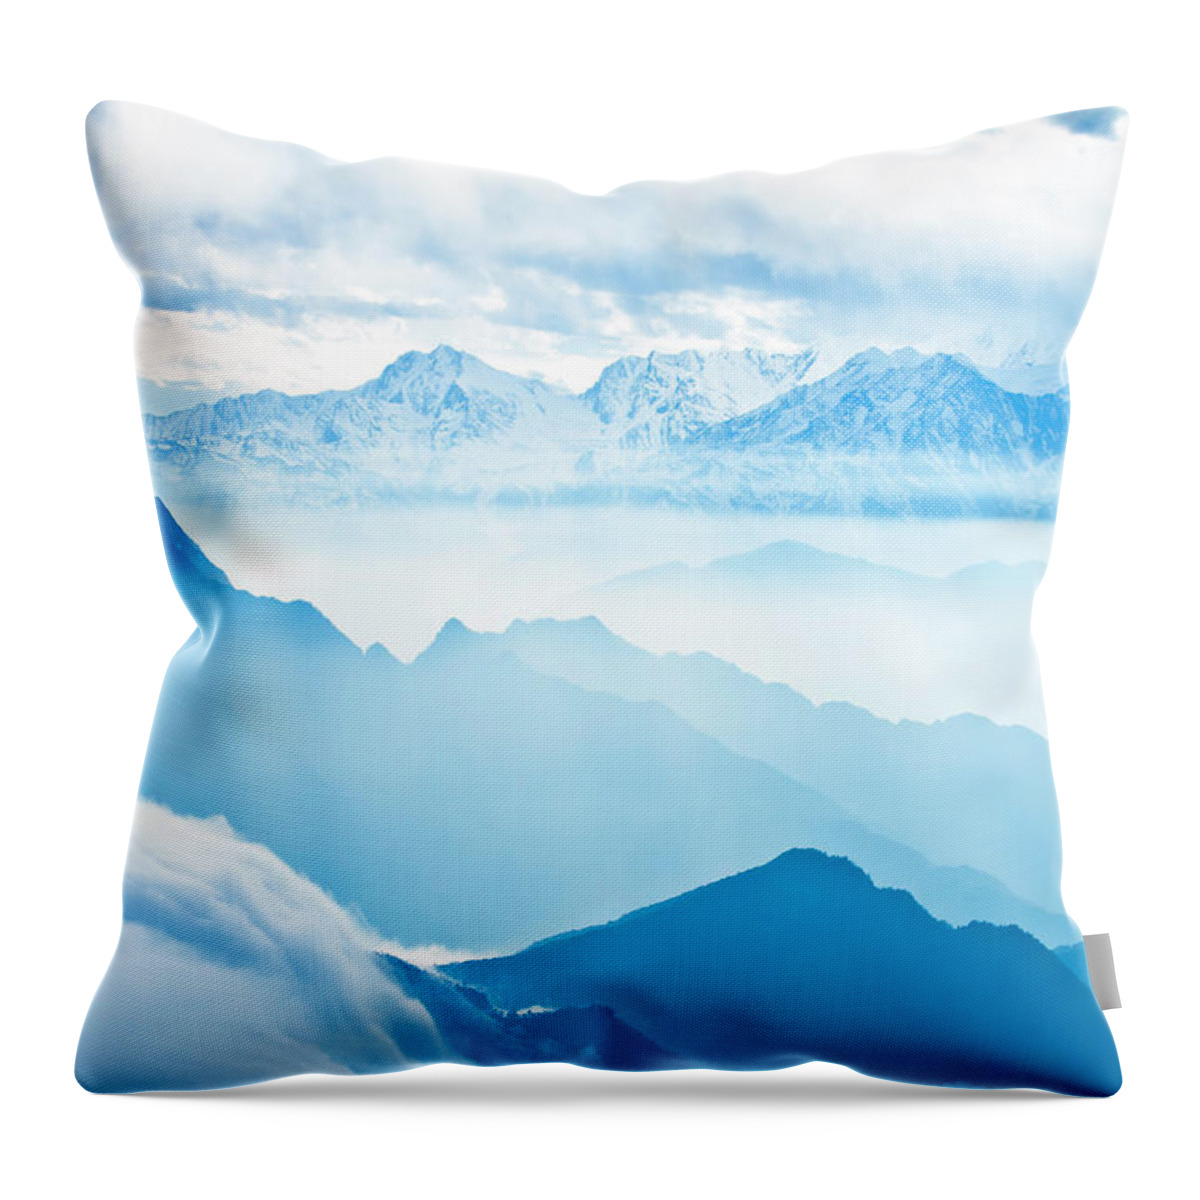 Chinese Culture Throw Pillow featuring the photograph Sea Of Clouds #3 by 4x-image